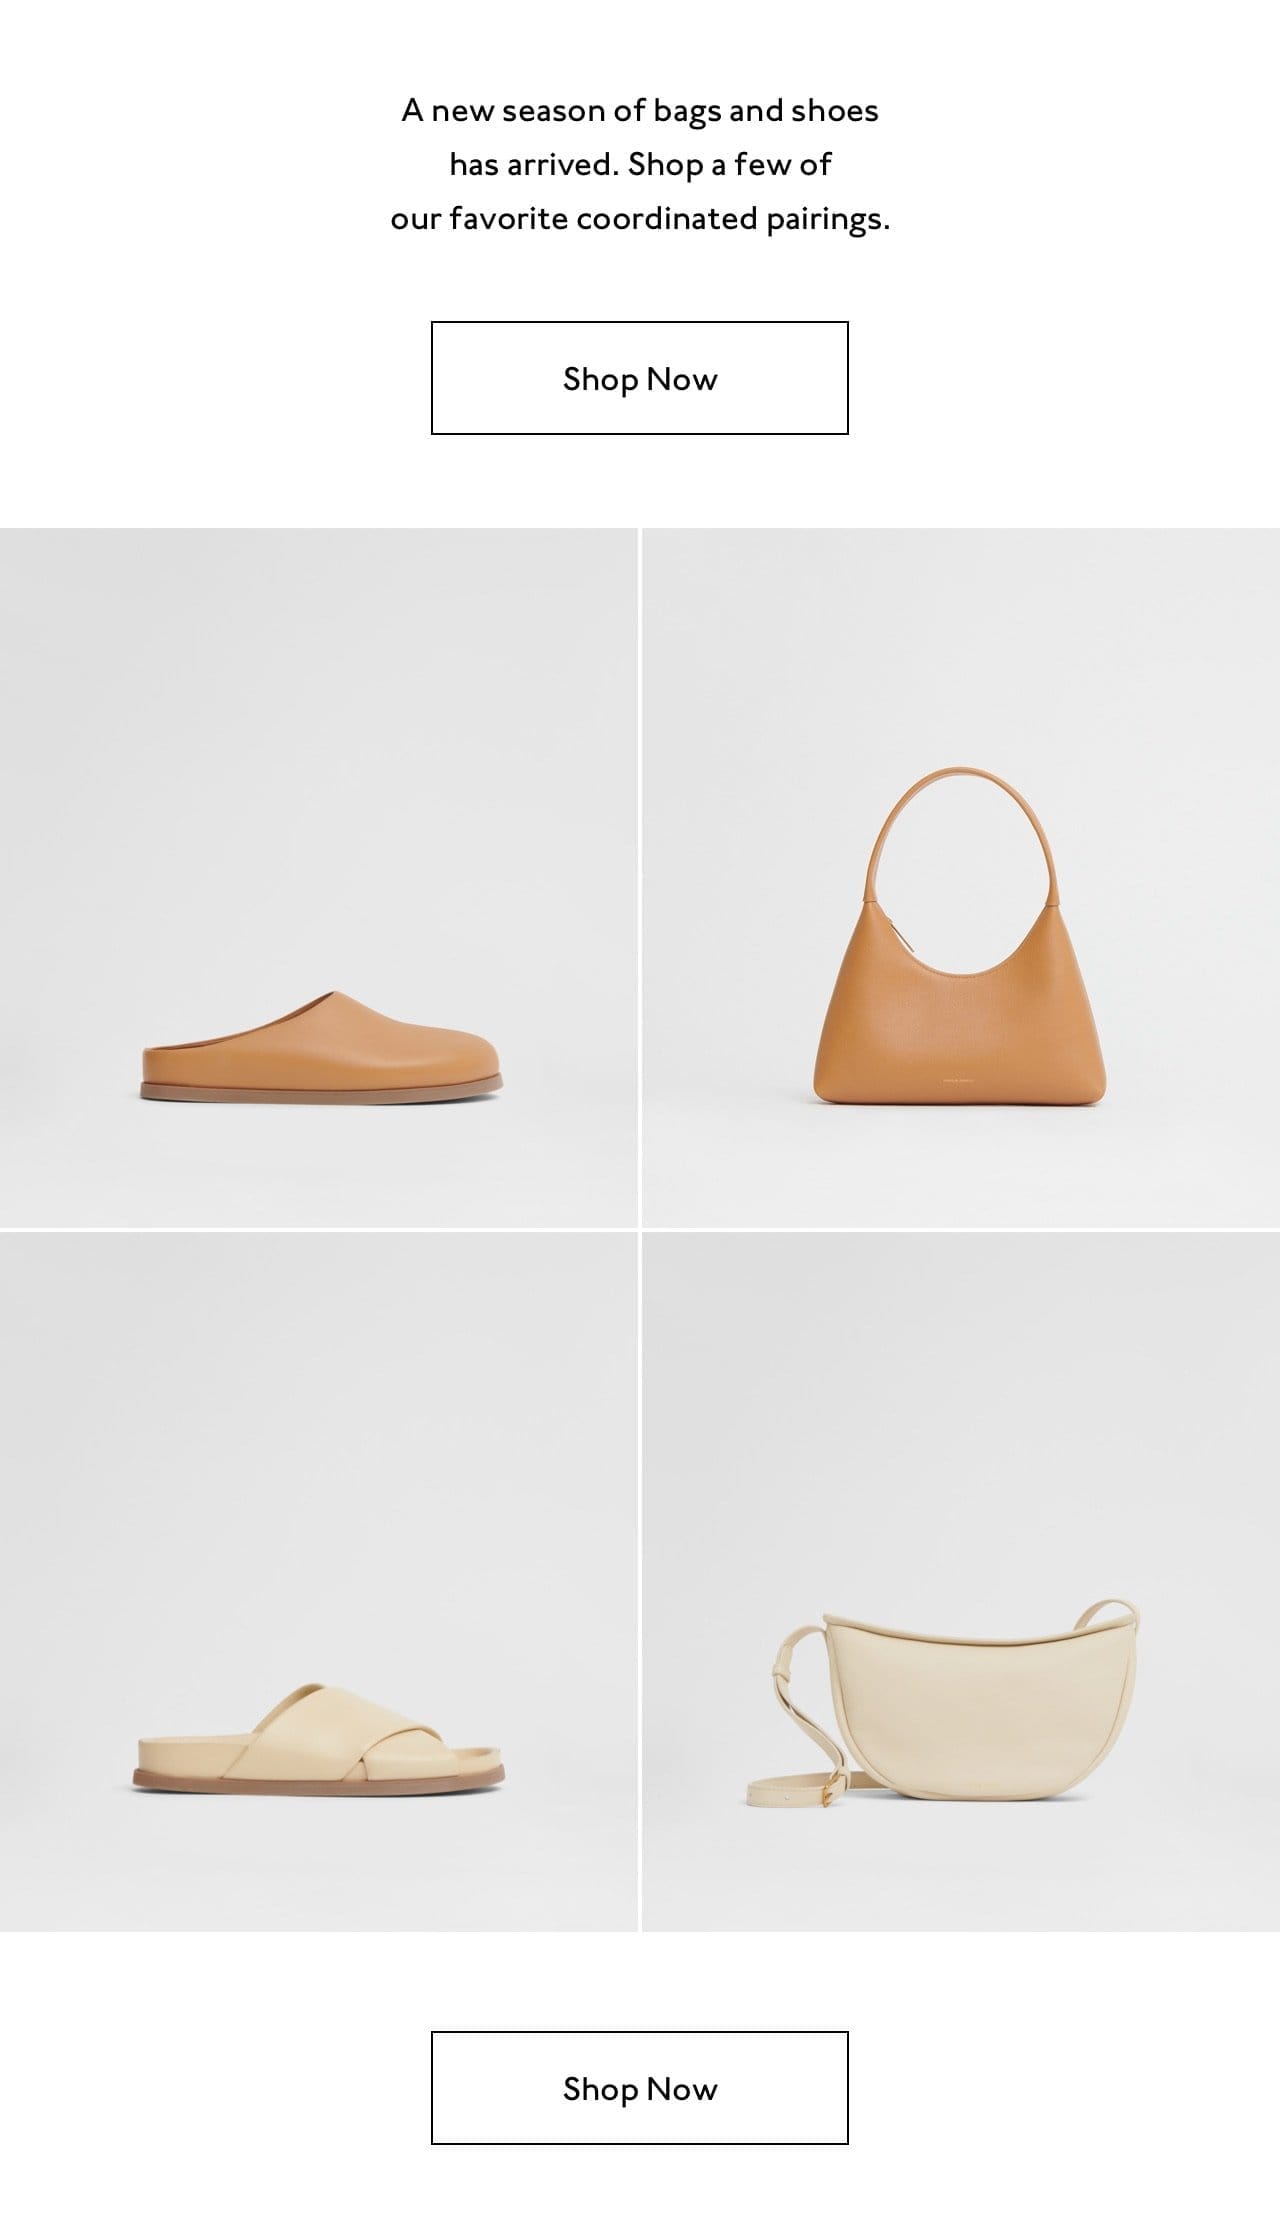 Pictured: light neutral bags and shoes paired together.